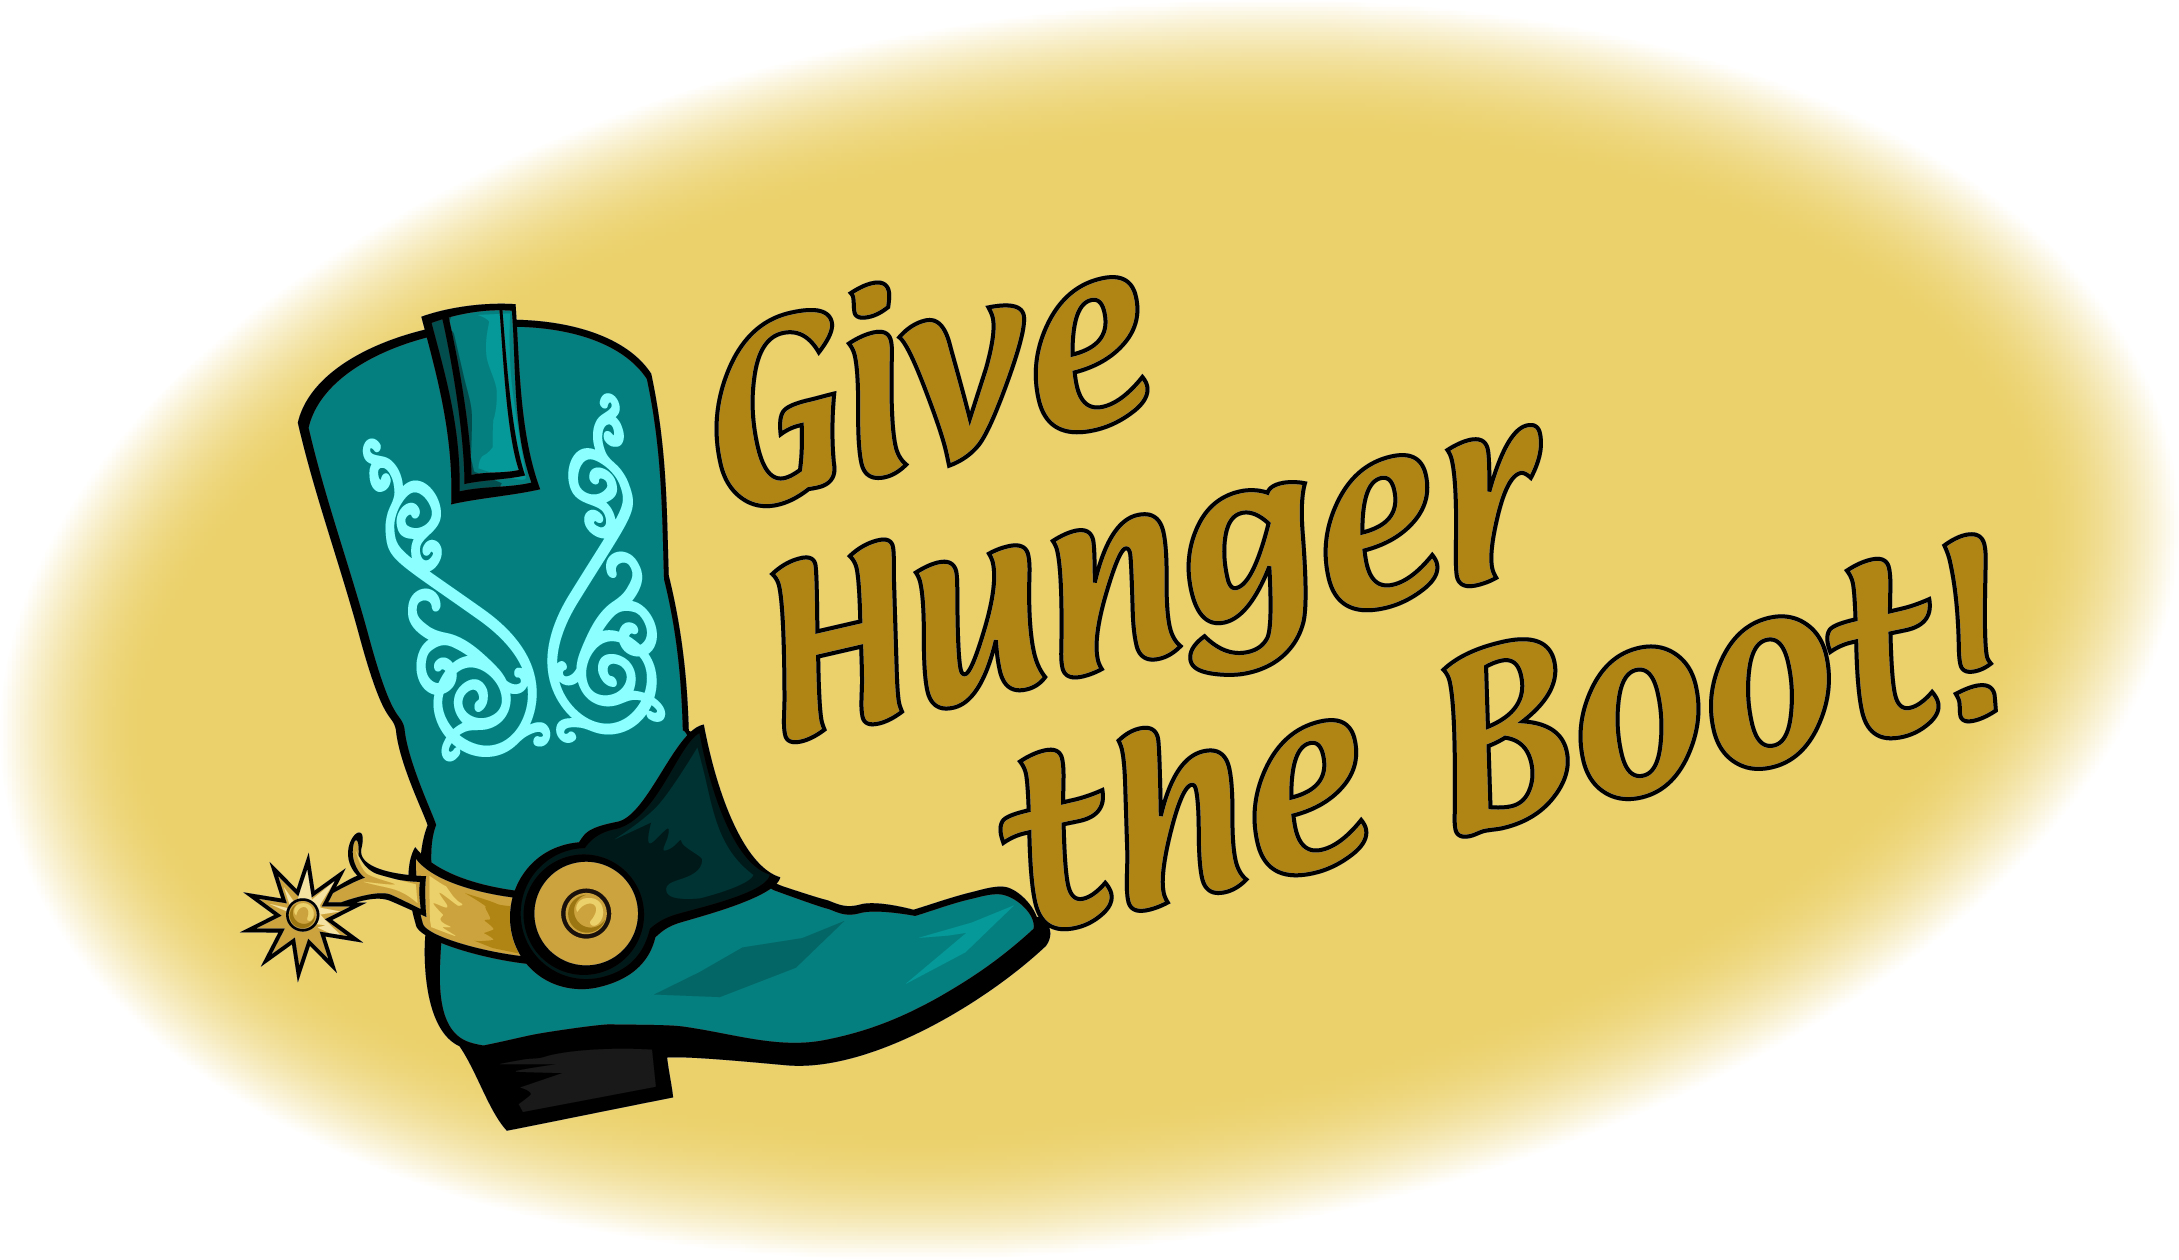 Give Hunger the Boot